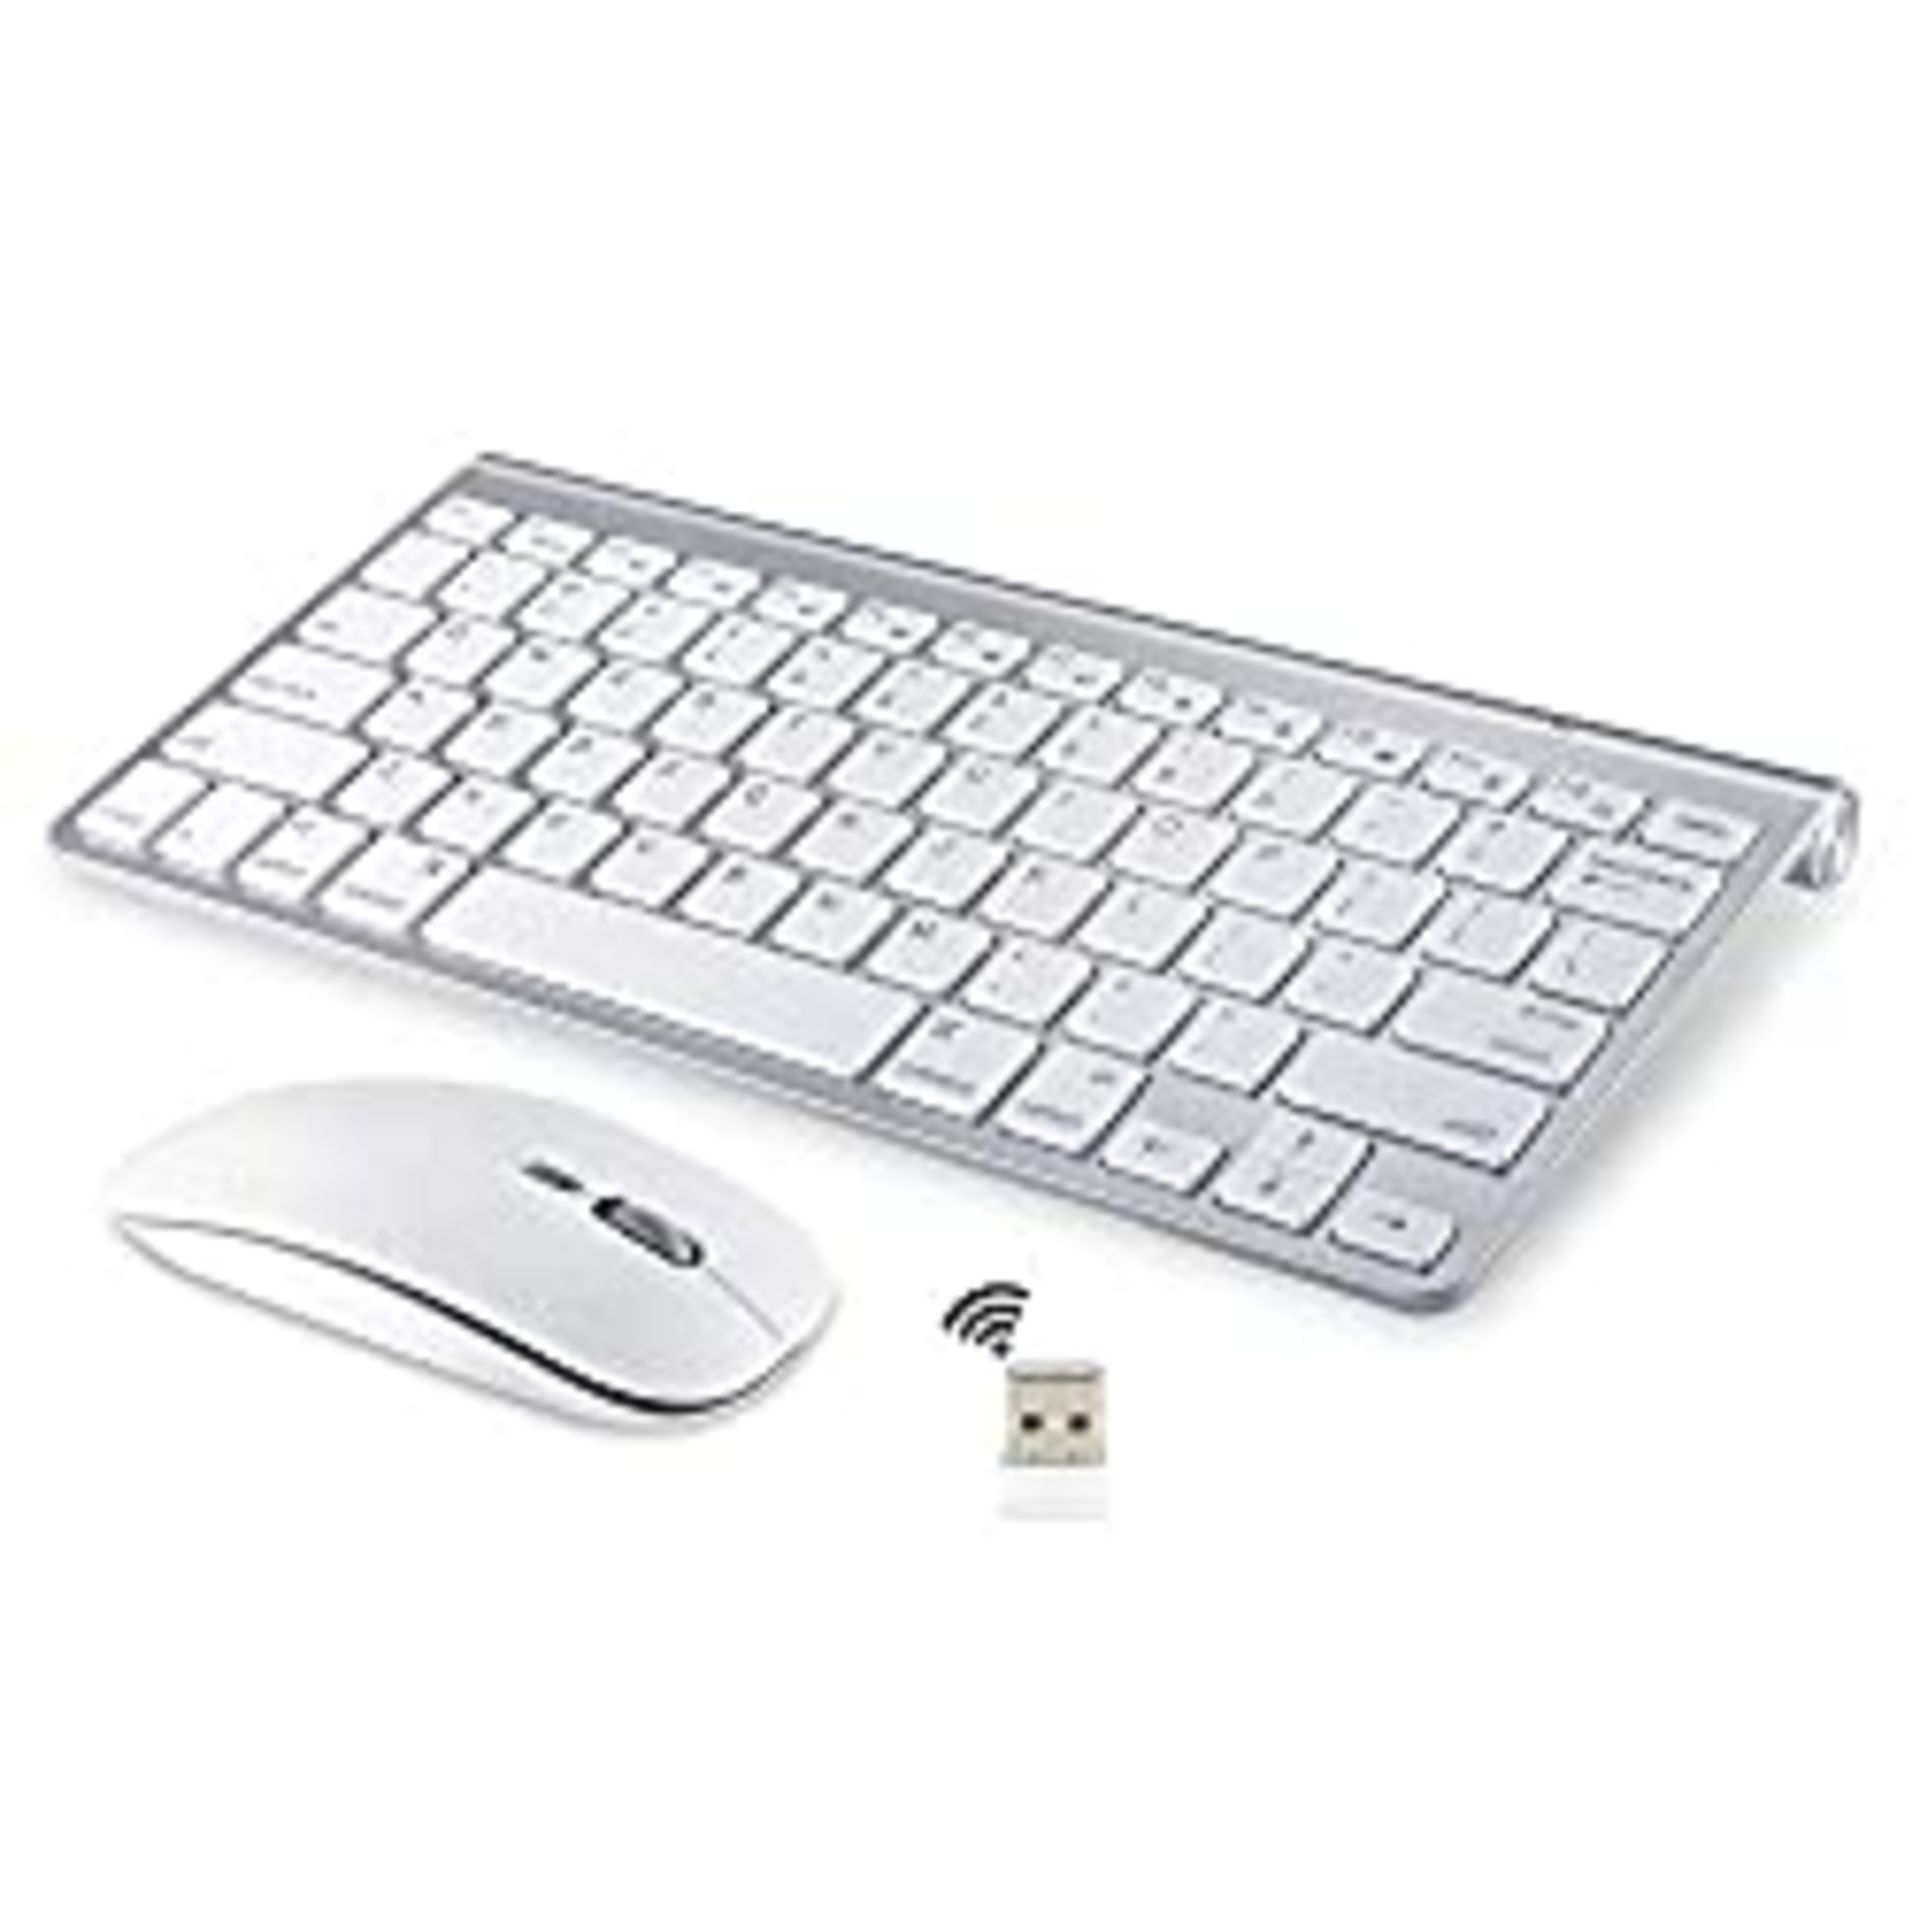 RRP £28.99 Wireless Keyboard and Mouse for Apple iMac Windows or Android (2.4G Wireless)